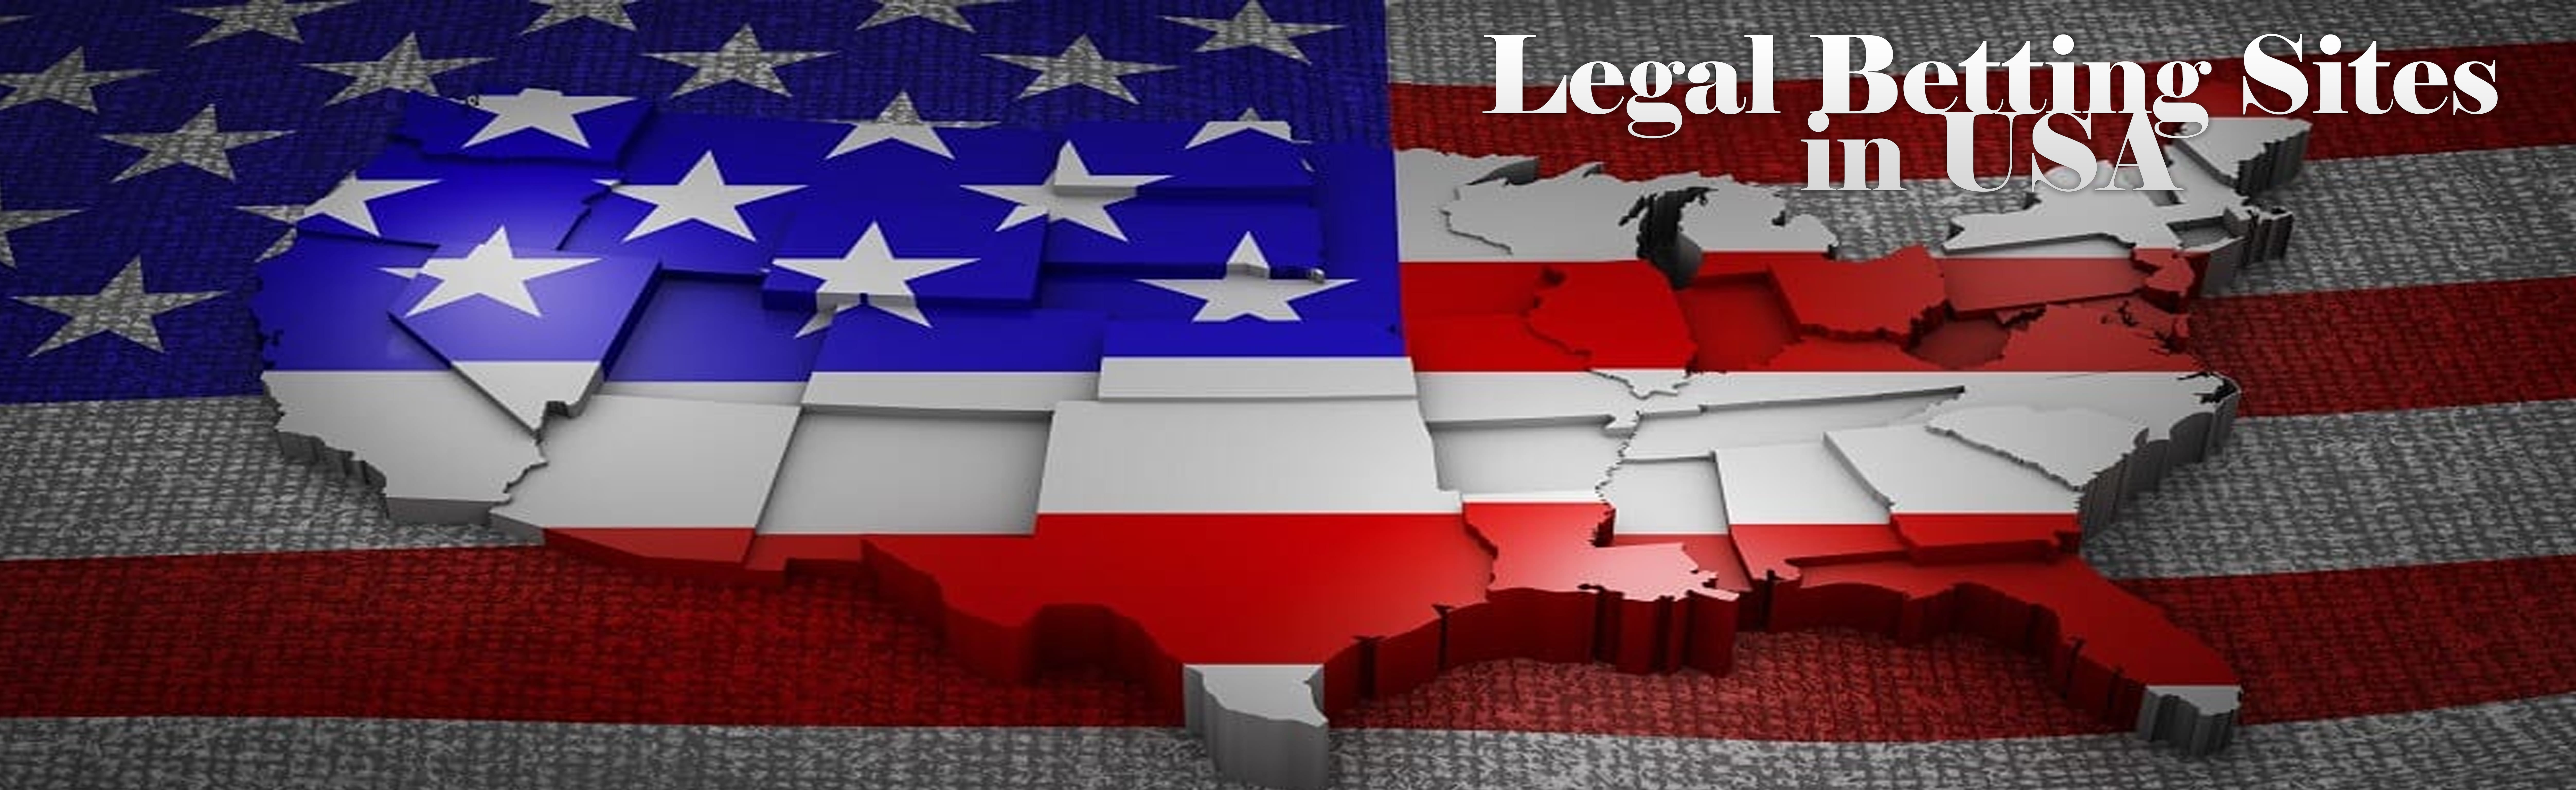 Legal Betting Sites in the USA